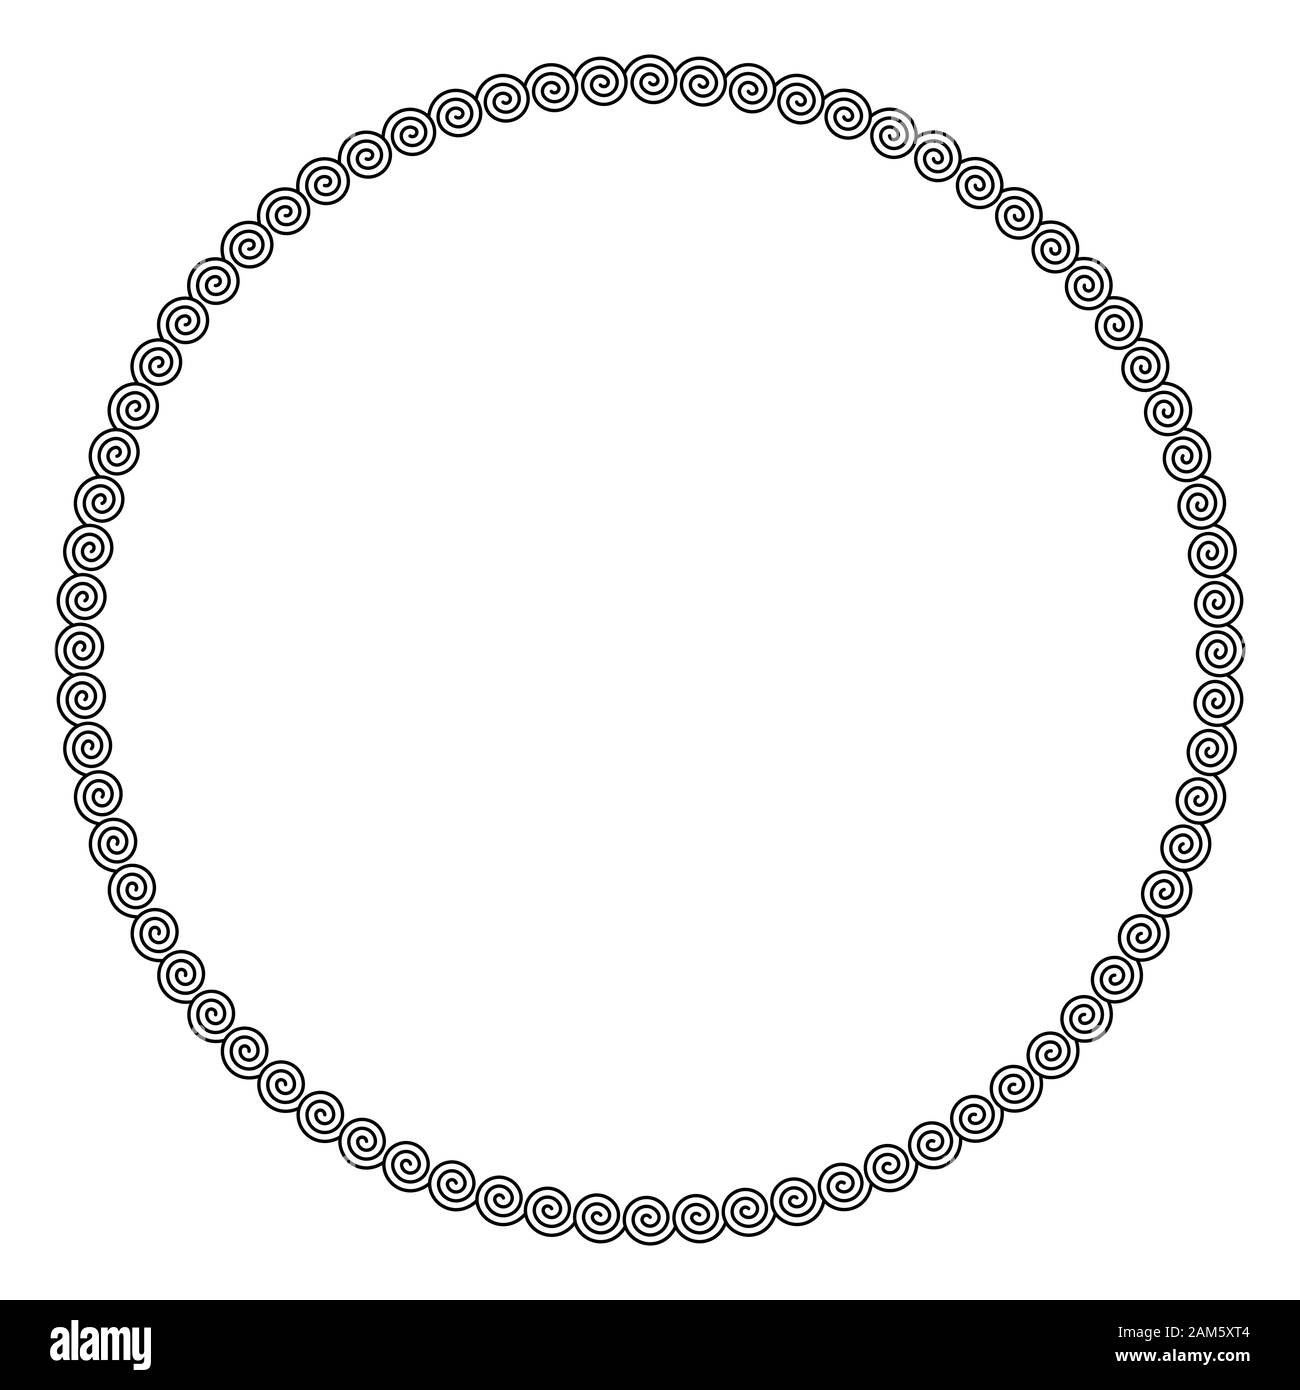 Circle frame made by linear spirals. Connected spirals forming a decorative motif and pattern, constructed from repeated lines. Stock Photo